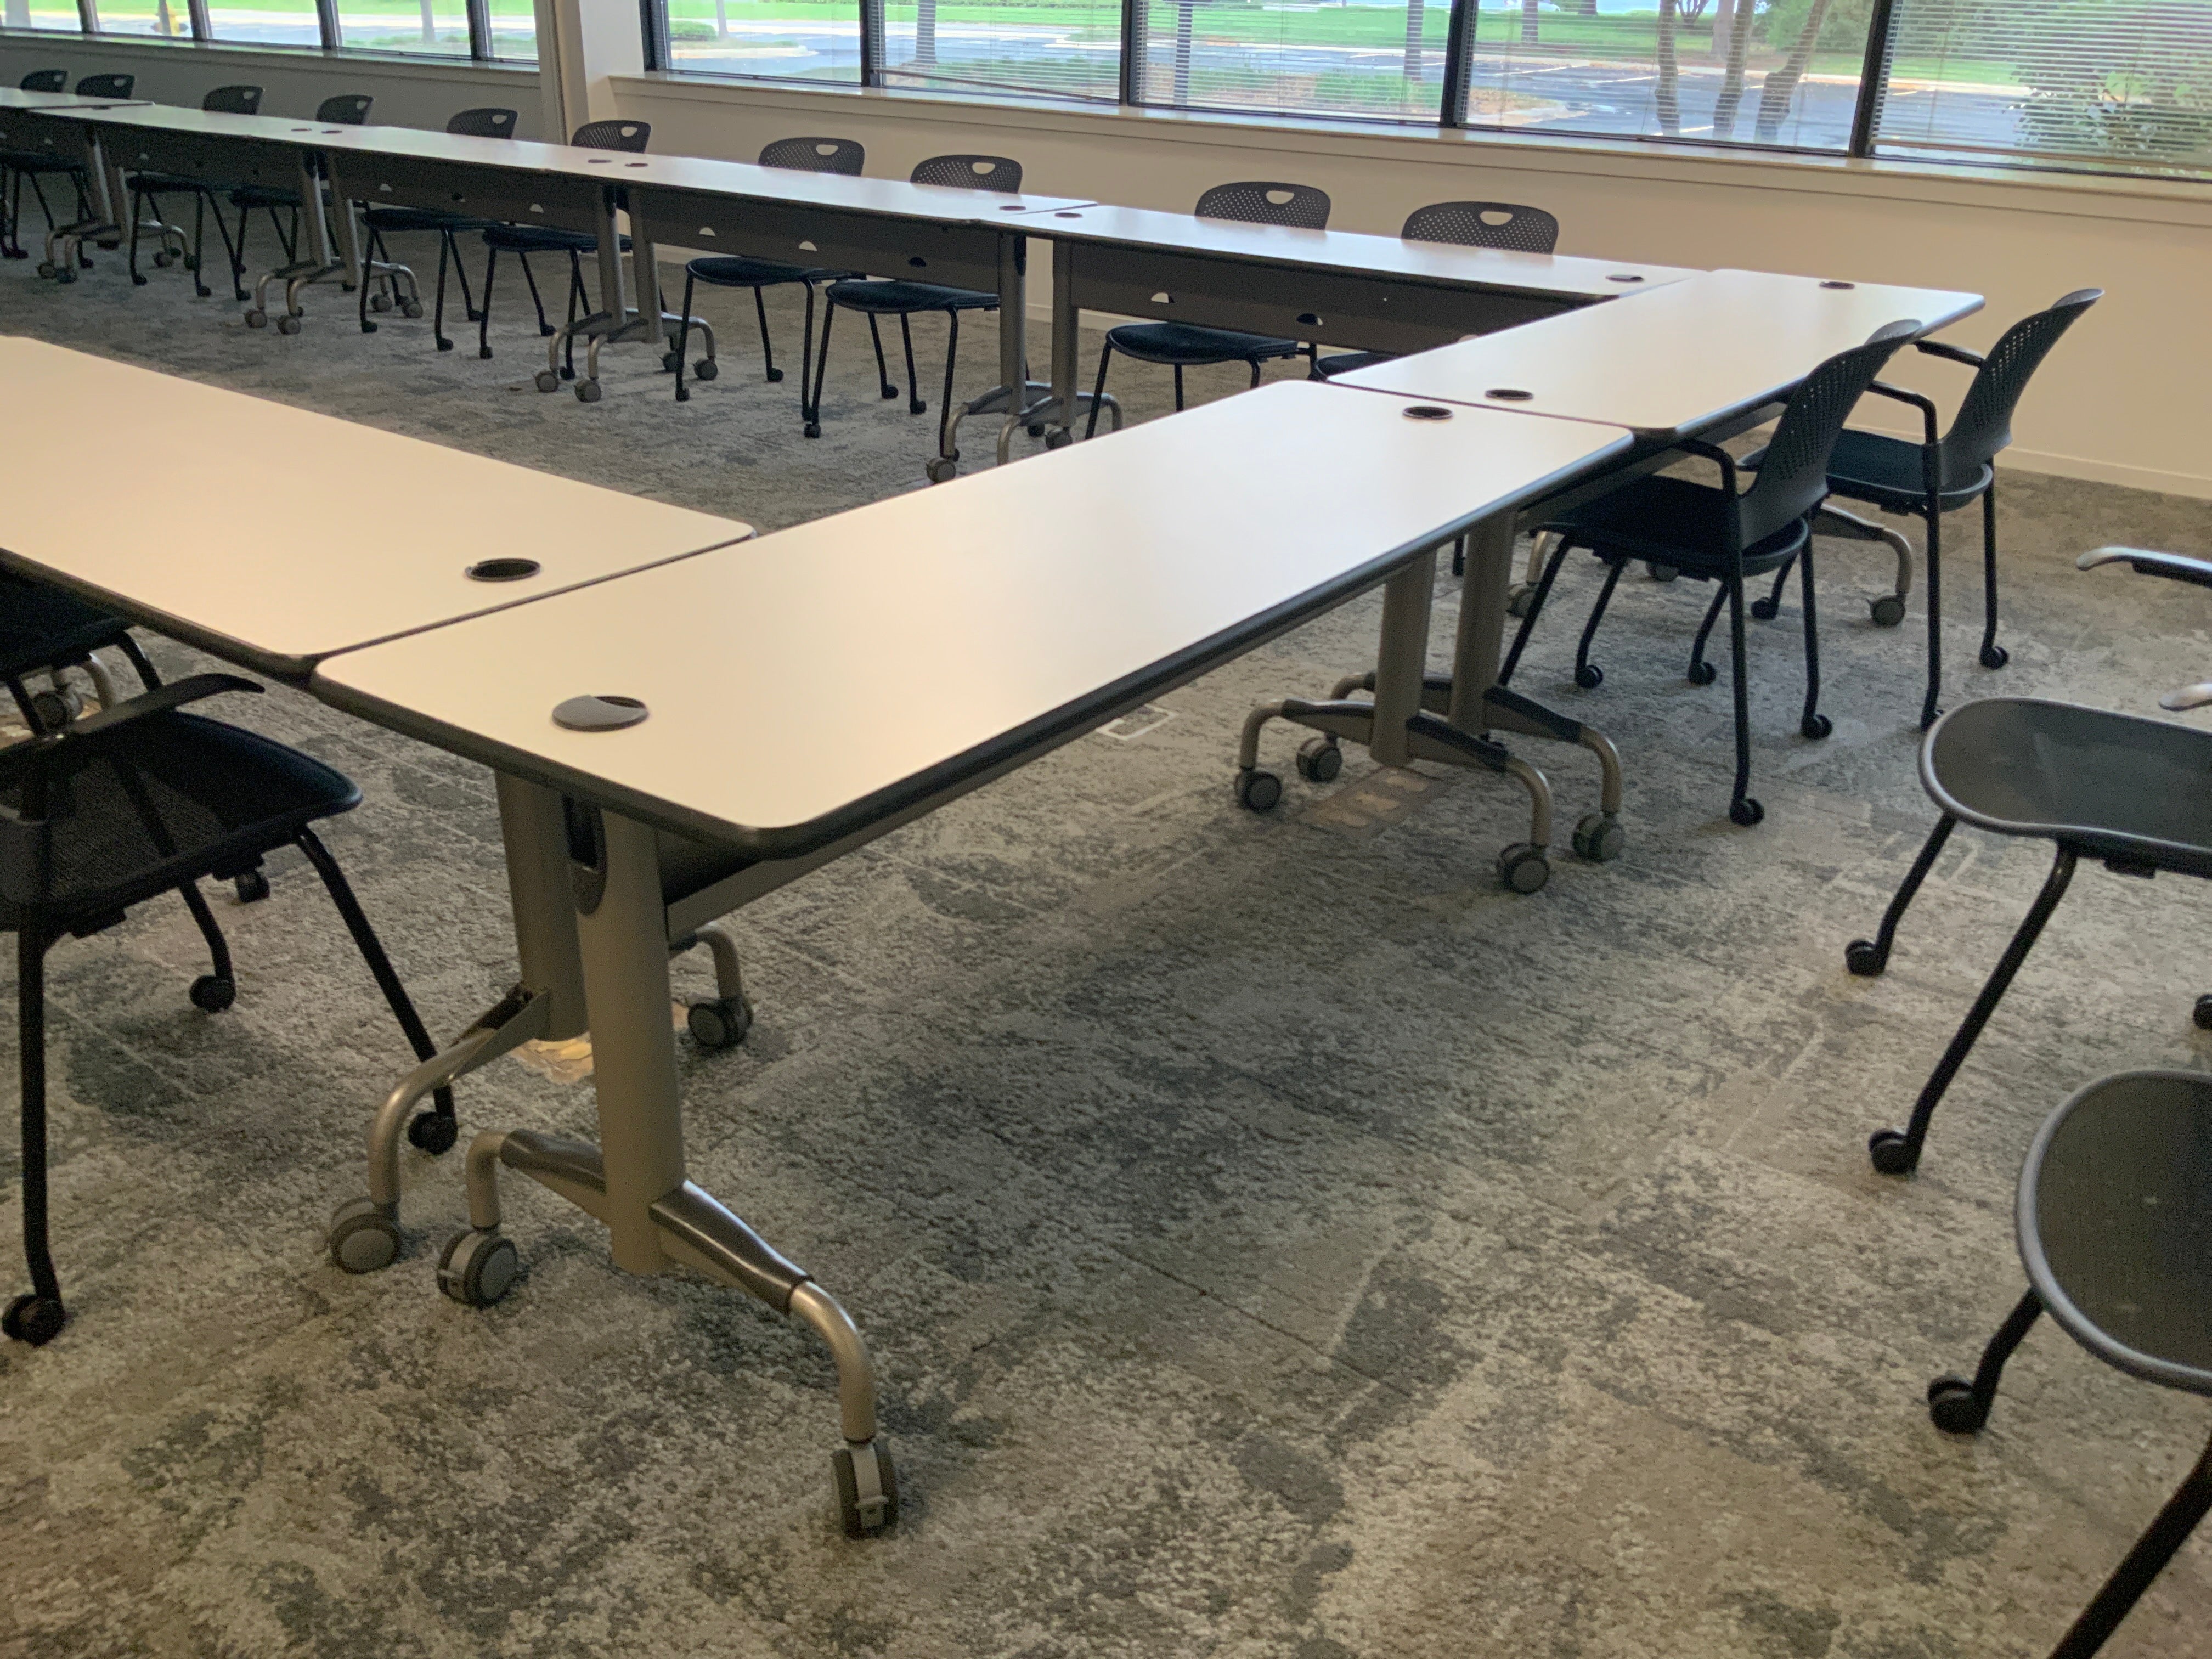 Mobile  Nesting Training Table 24"x72" - Preowned - FOB Vernon Hills, IL (Min Purchase Qty = 20)